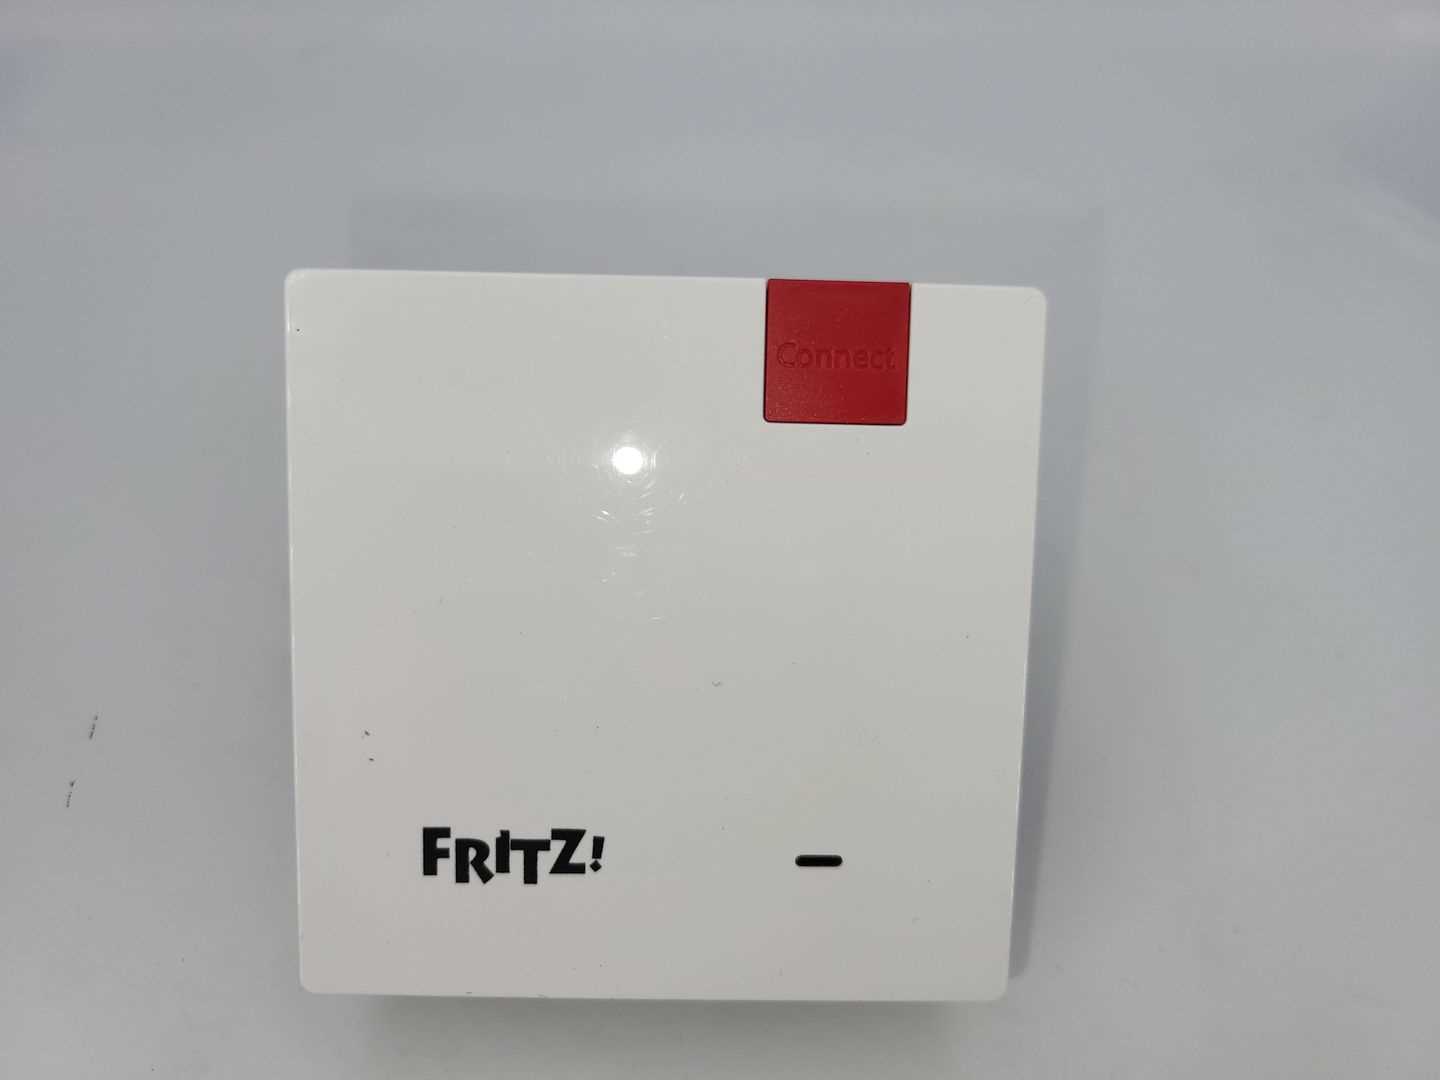 Los 168 - Router AVM Fritz!Repeater 1200 AX